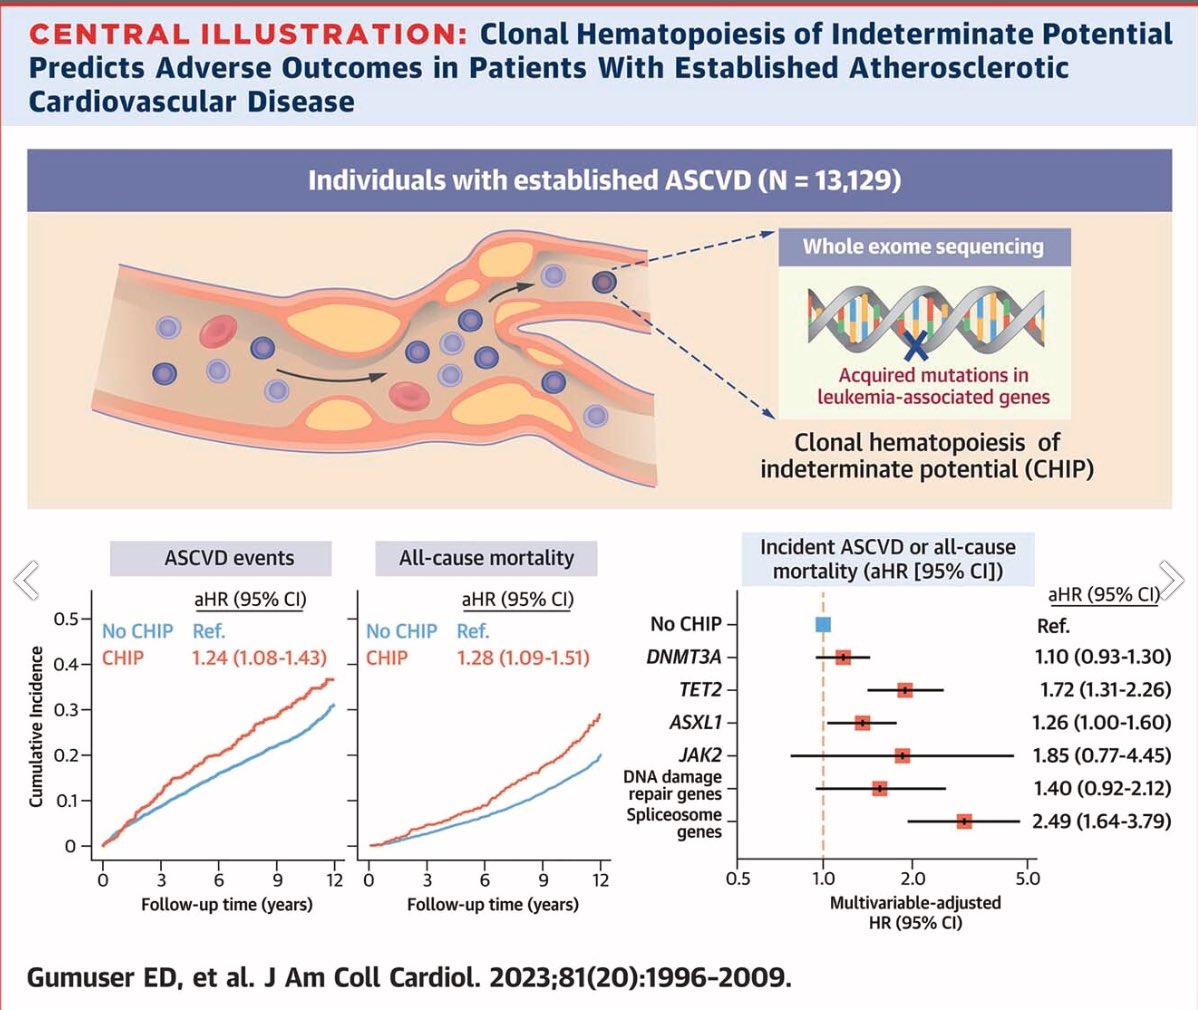 Congrats to @esradgumuser @MGHCVFellows @artschuermans @KU_Leuven whose paper on clonal hematopoiesis 🩸 🧬 and recurrent ASCVD 🫀 events was selected by Dr. Fuster as a @JACCJournals #JACC 2023 editor’s top pick! Paper: jacc.org/doi/10.1016/j.…